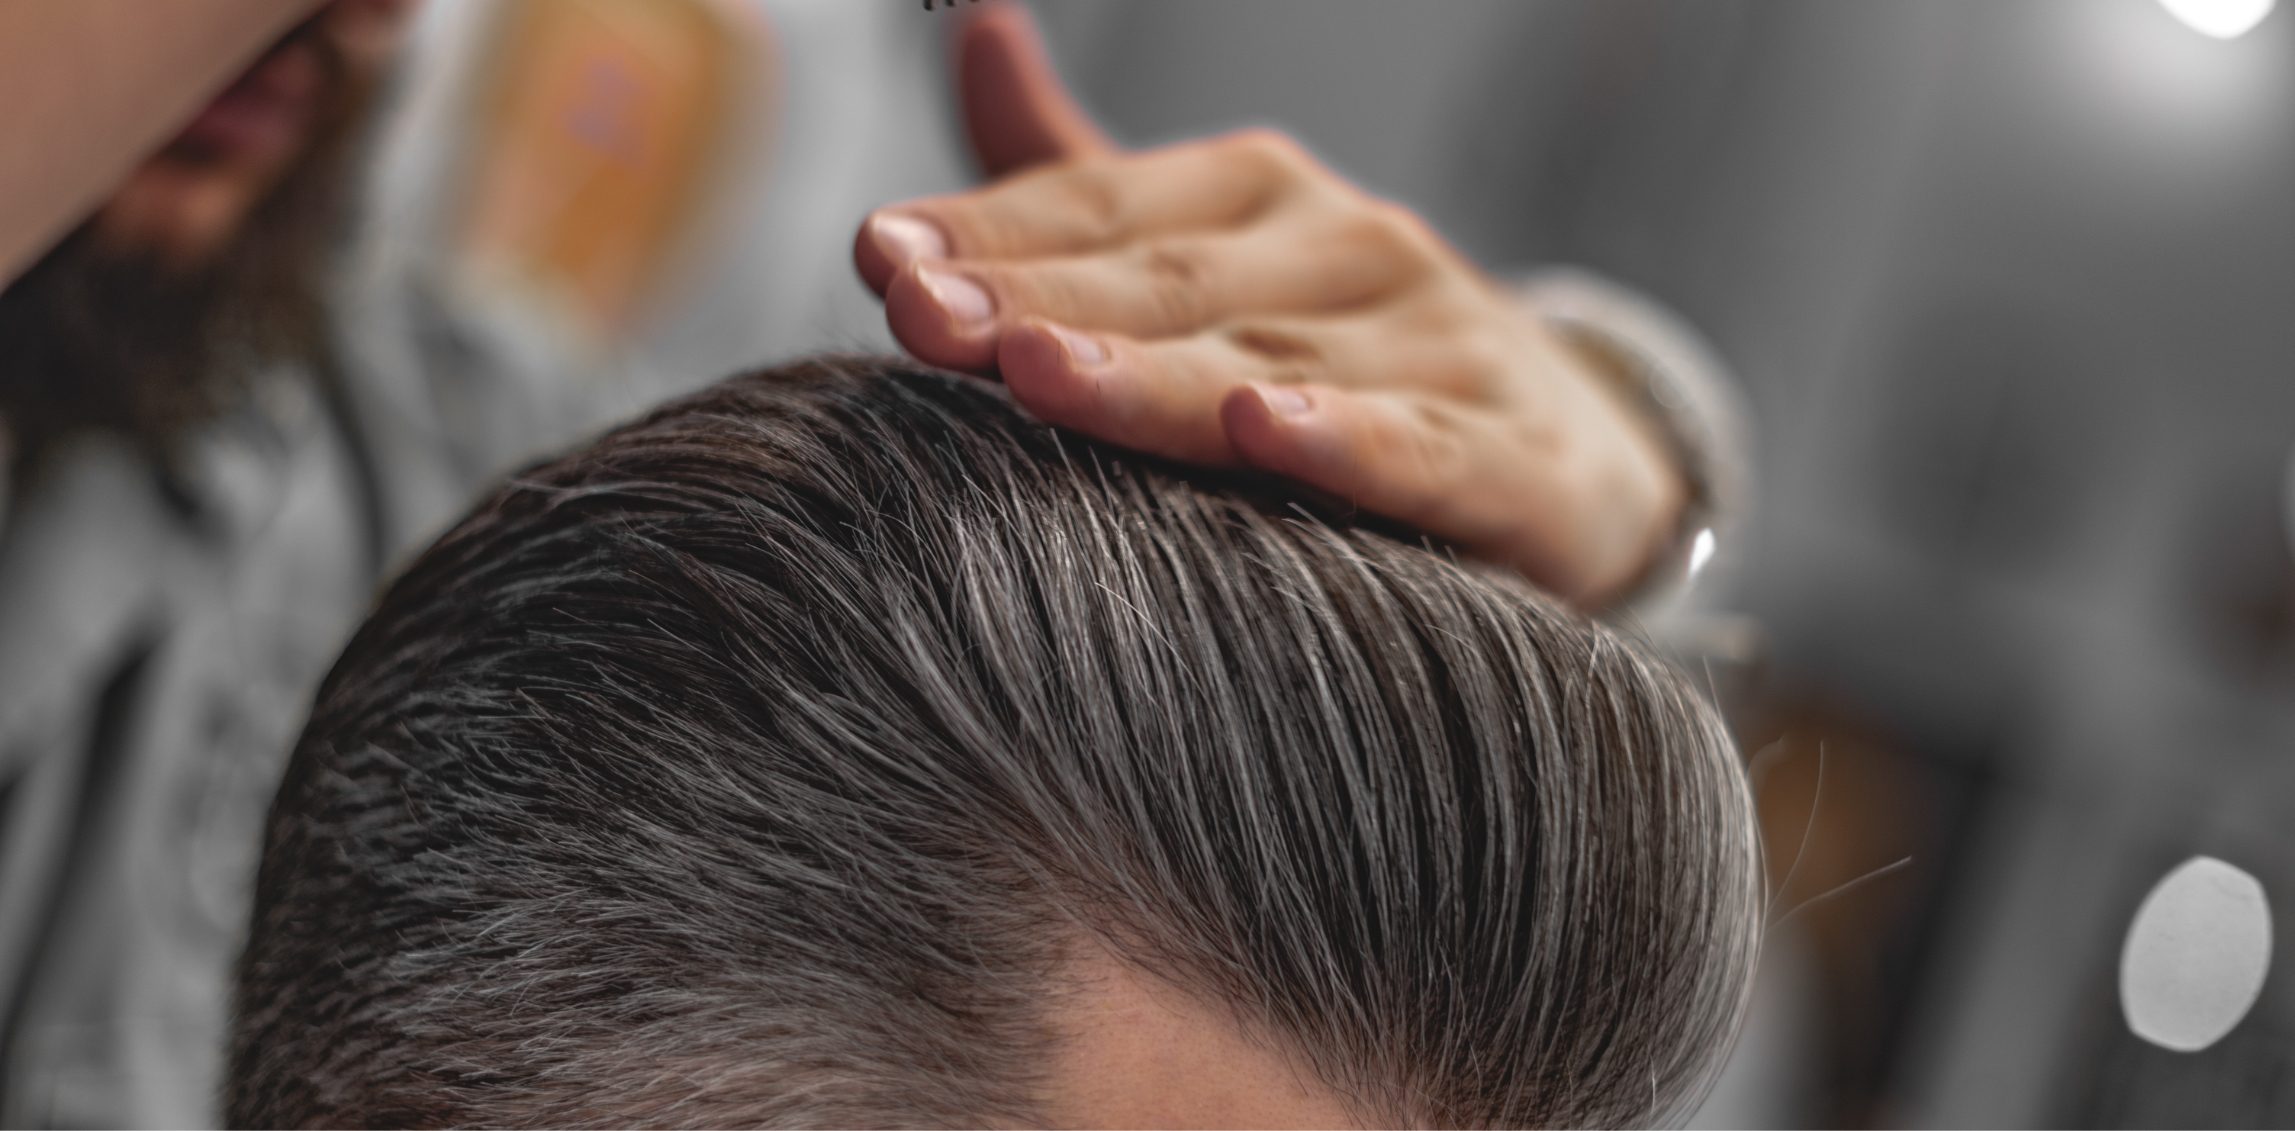 Close-up up on a man's hair after hair styling